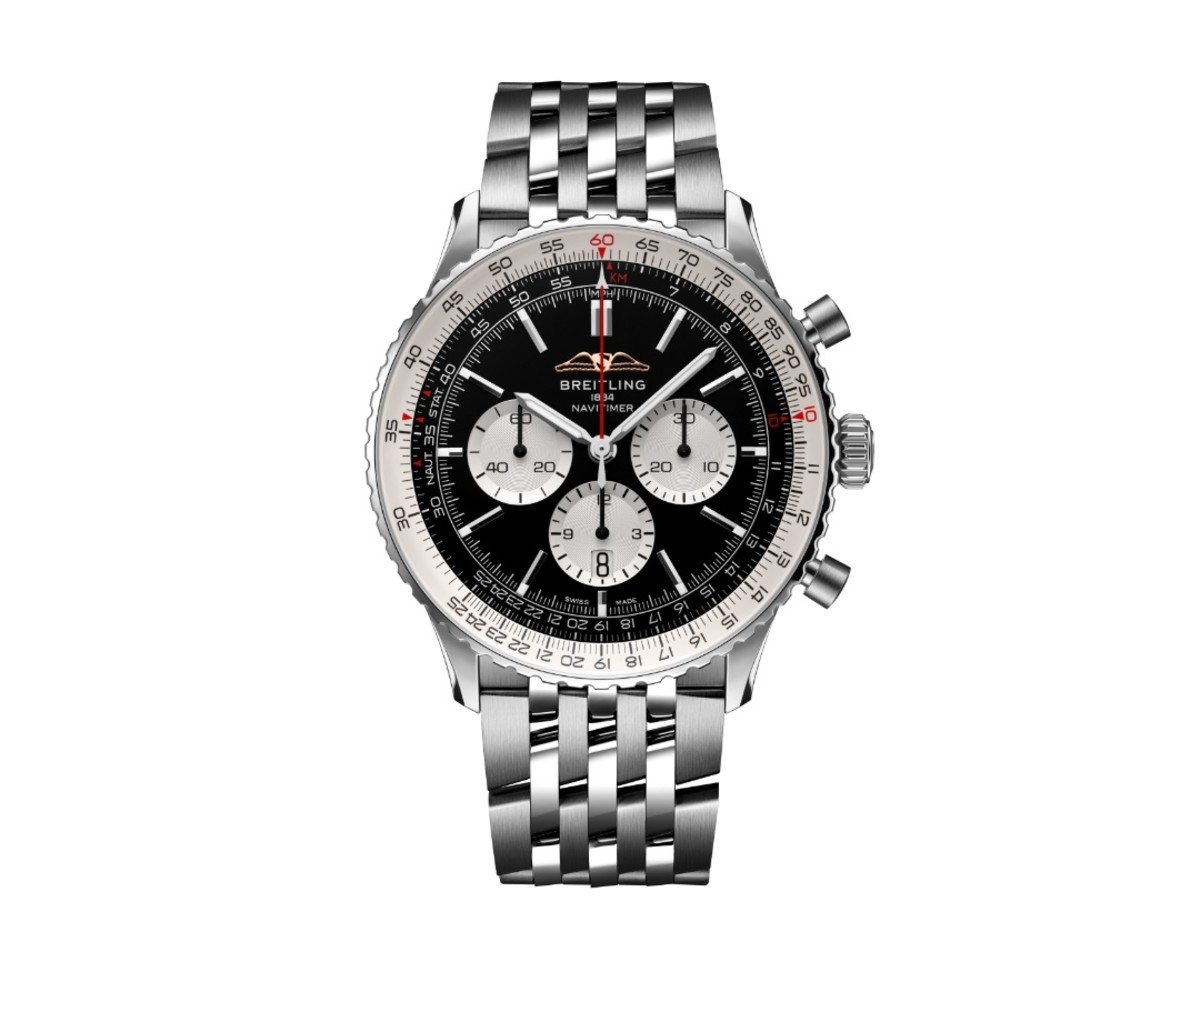 A Breitling Navitimer watch with a stainless steel bracelet on a white background